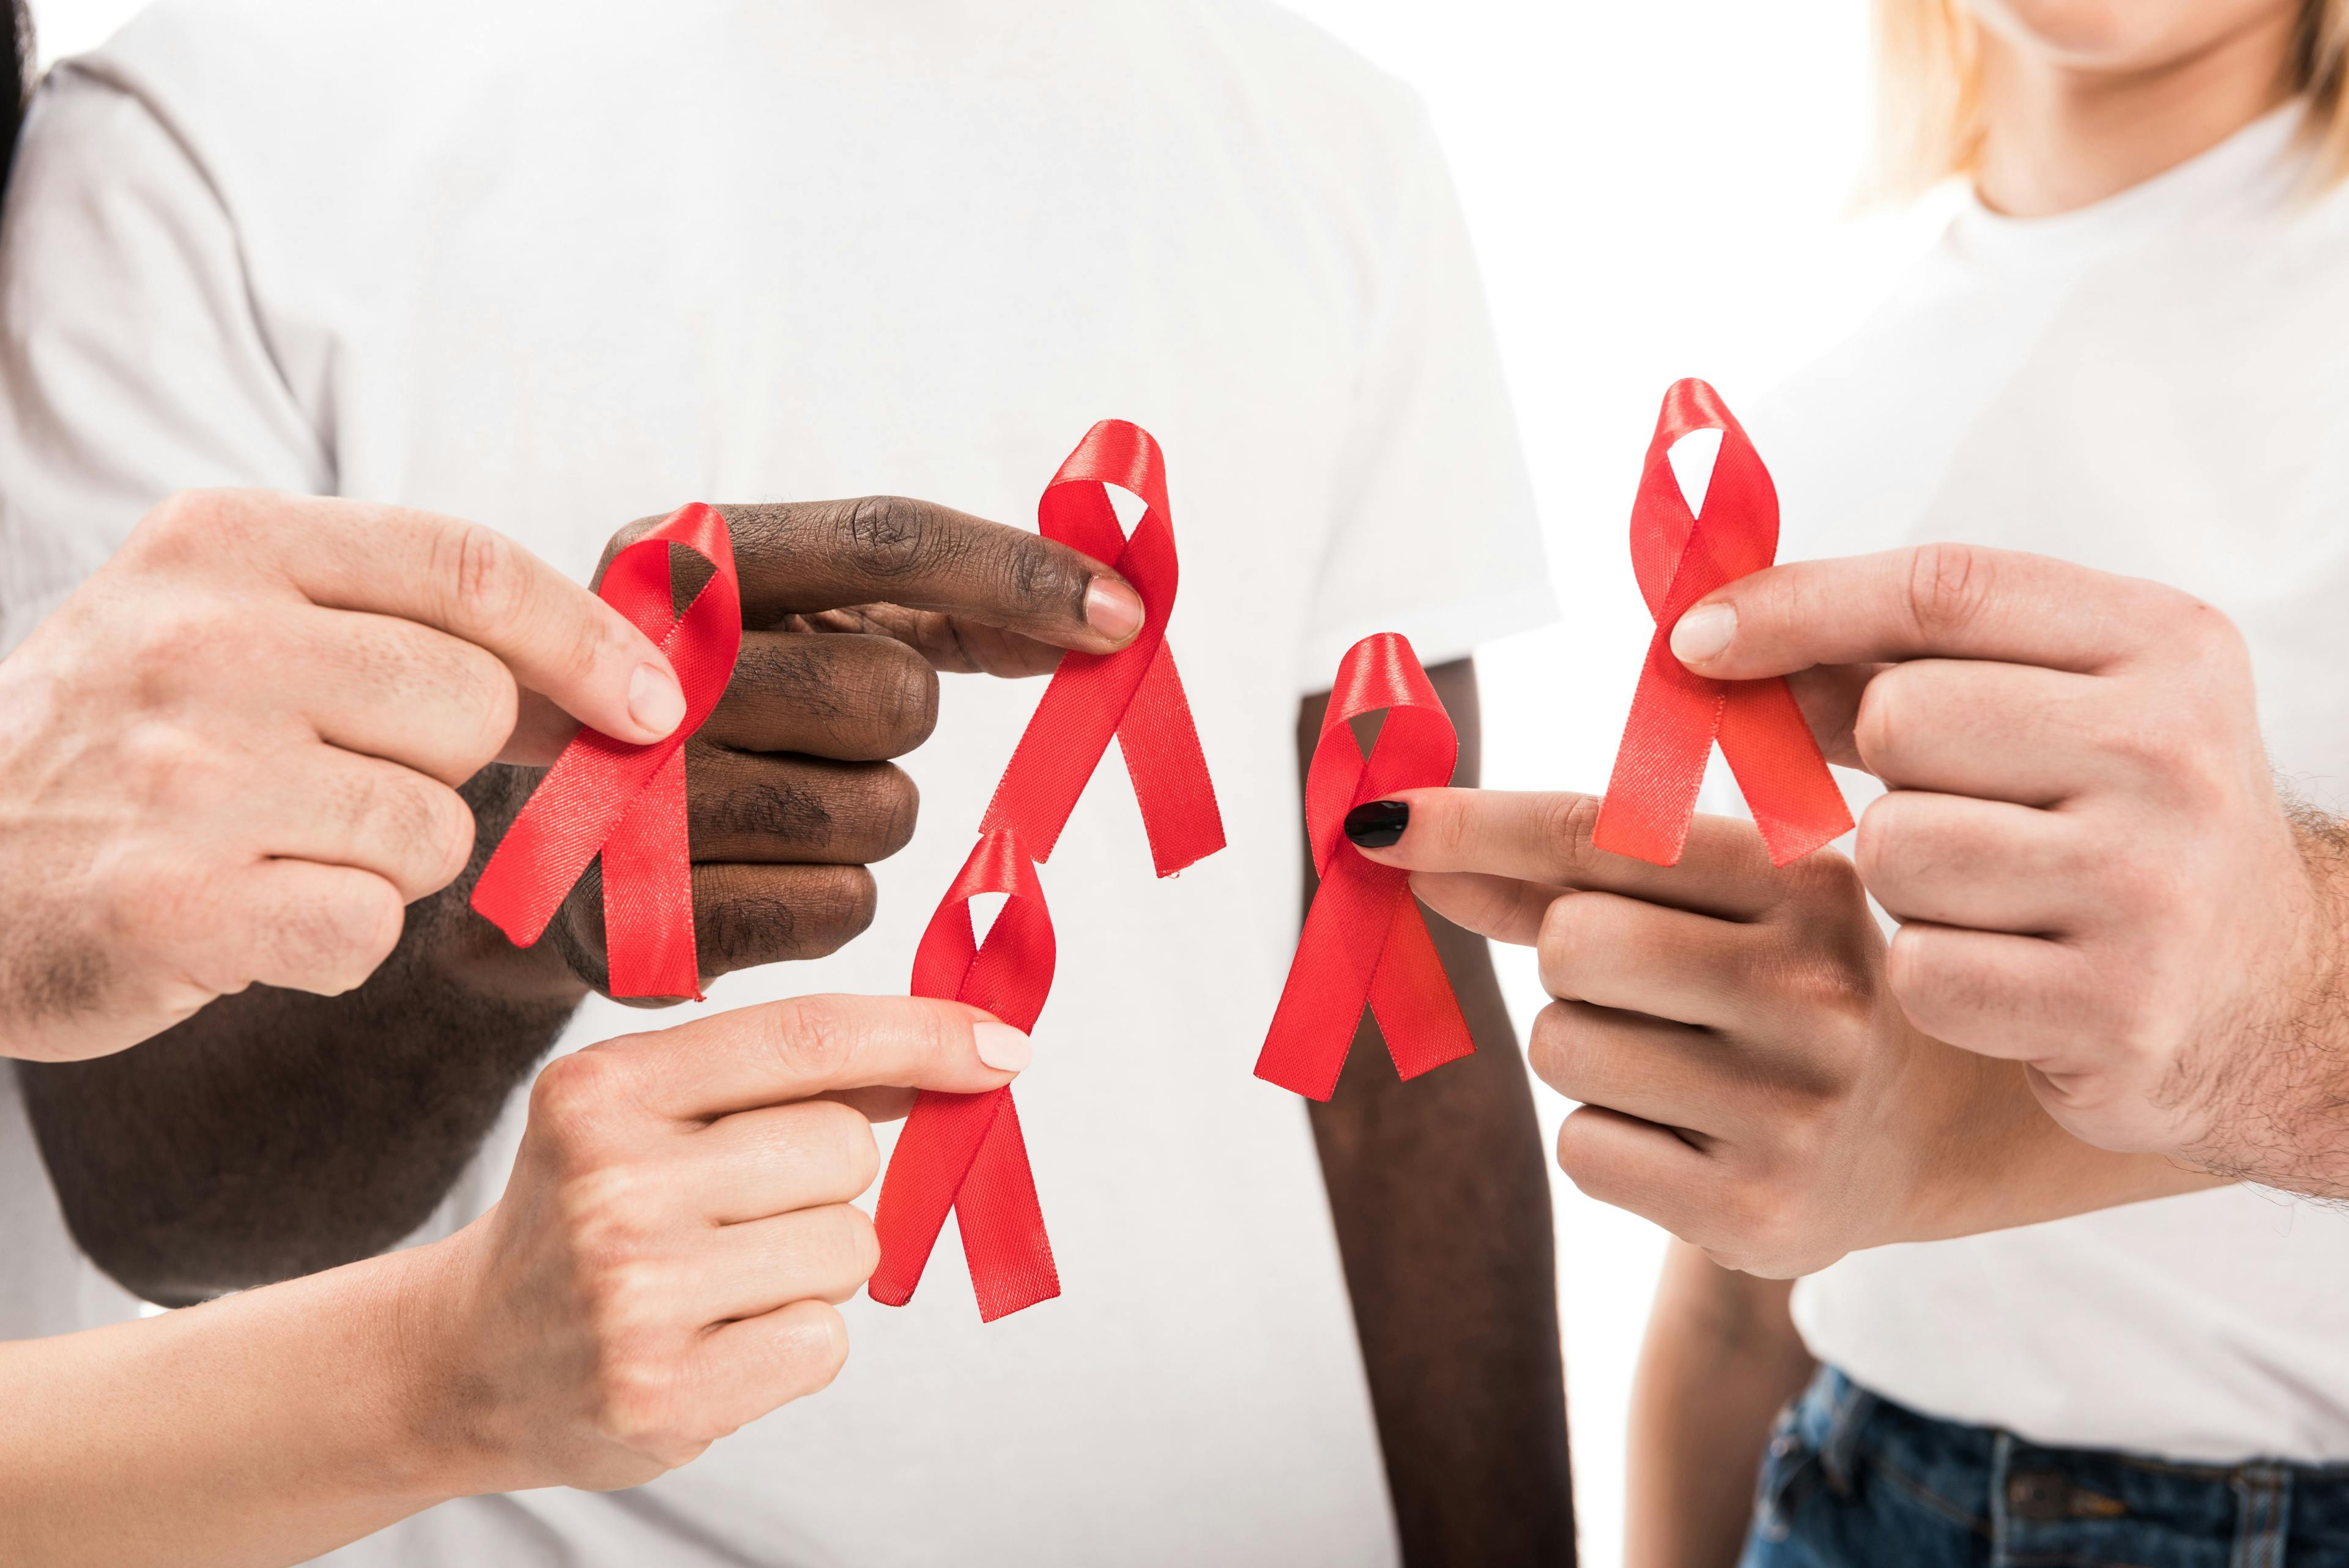 People in blank white T-shirts holding AIDS awareness red ribbons. | Image credit: LIGHTFIELD STUDIOS - stock.adobe.com